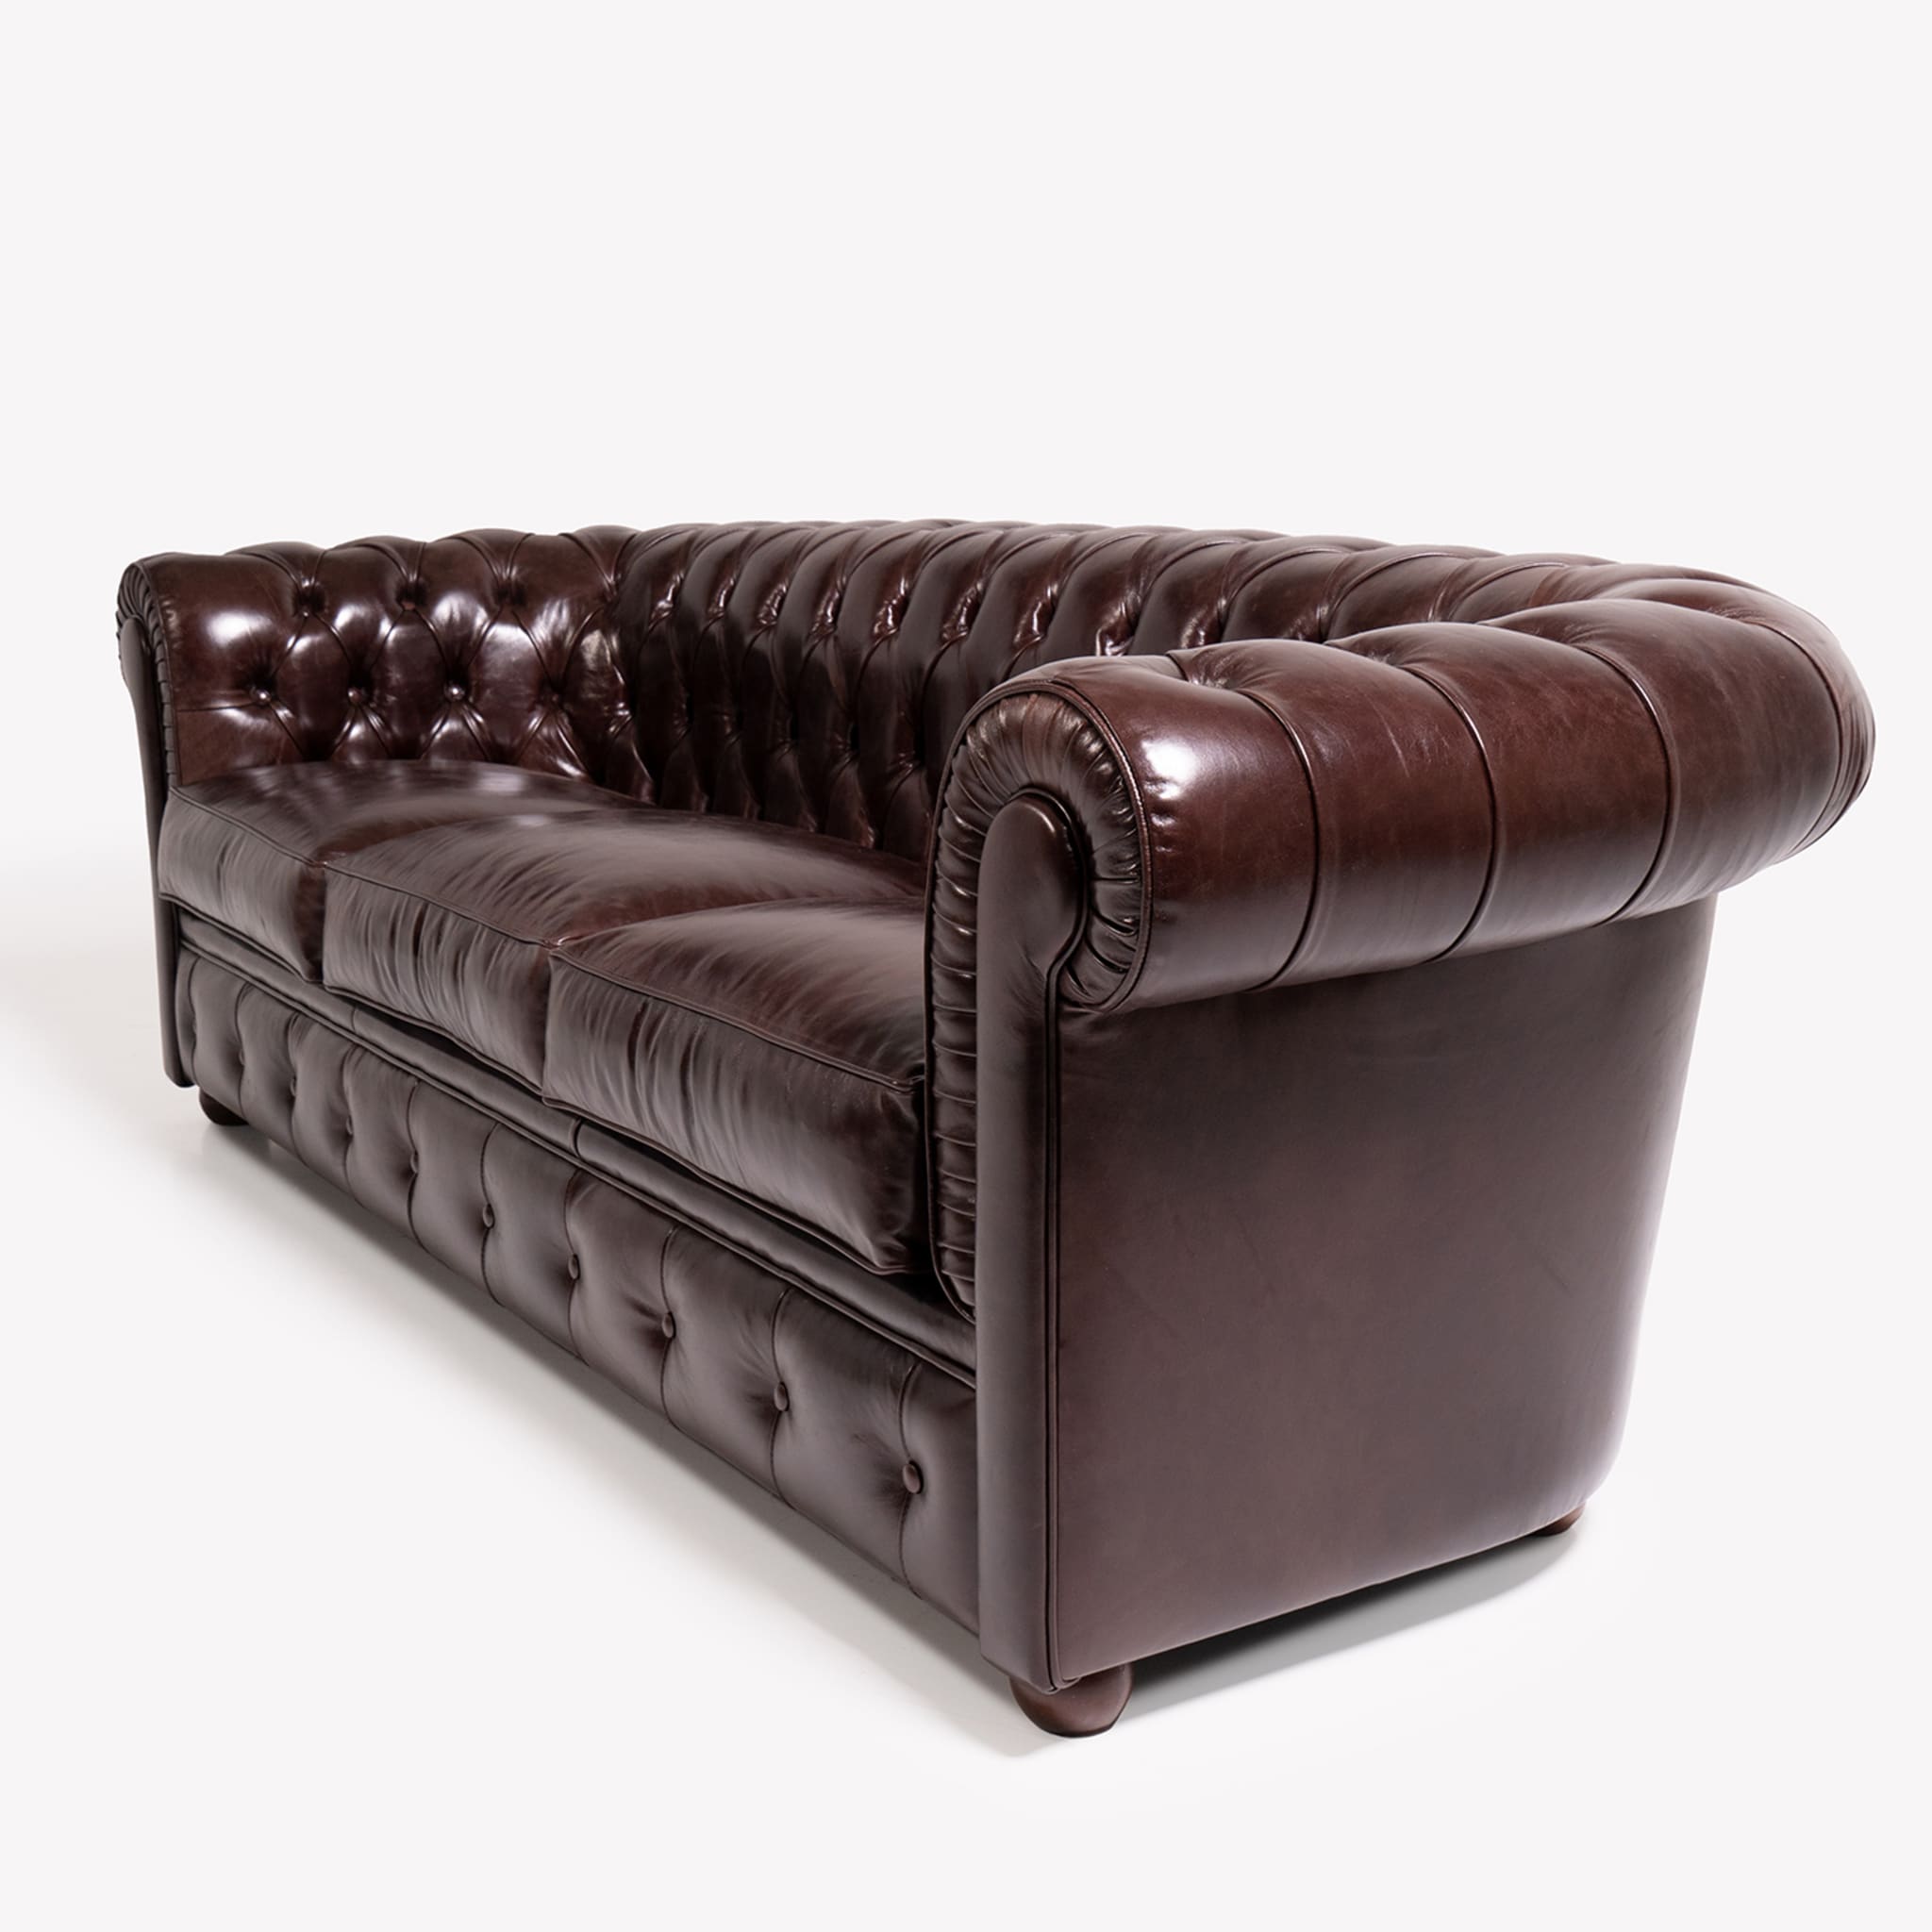 Chesterfield Brown Leather 3-Seater Sofa - Alternative view 1